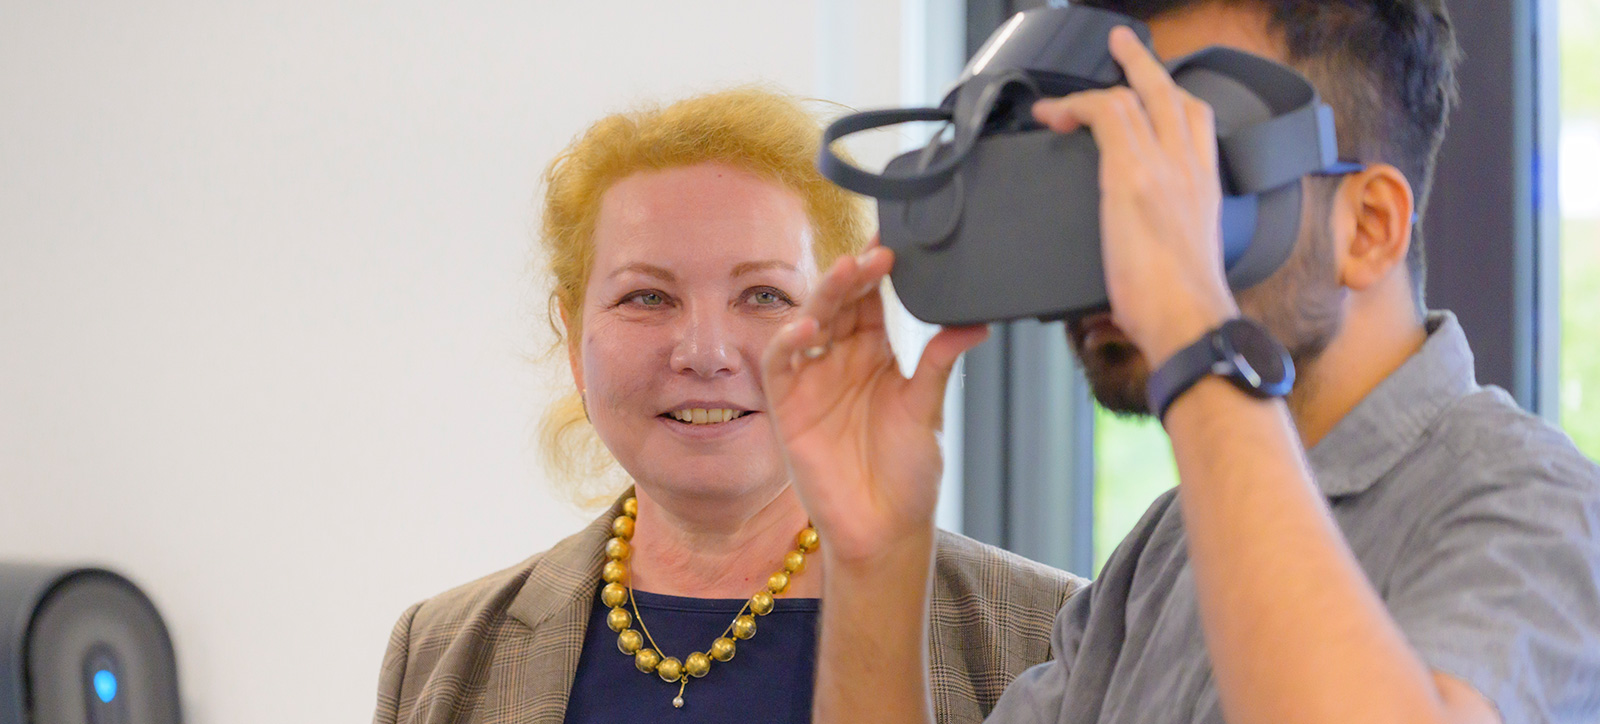 Dr Iryna Tykhomyrova, President of the International Management Institute in Kyiv, is shown the virtual reality technology in the Gillmore Centre for Financial Technology